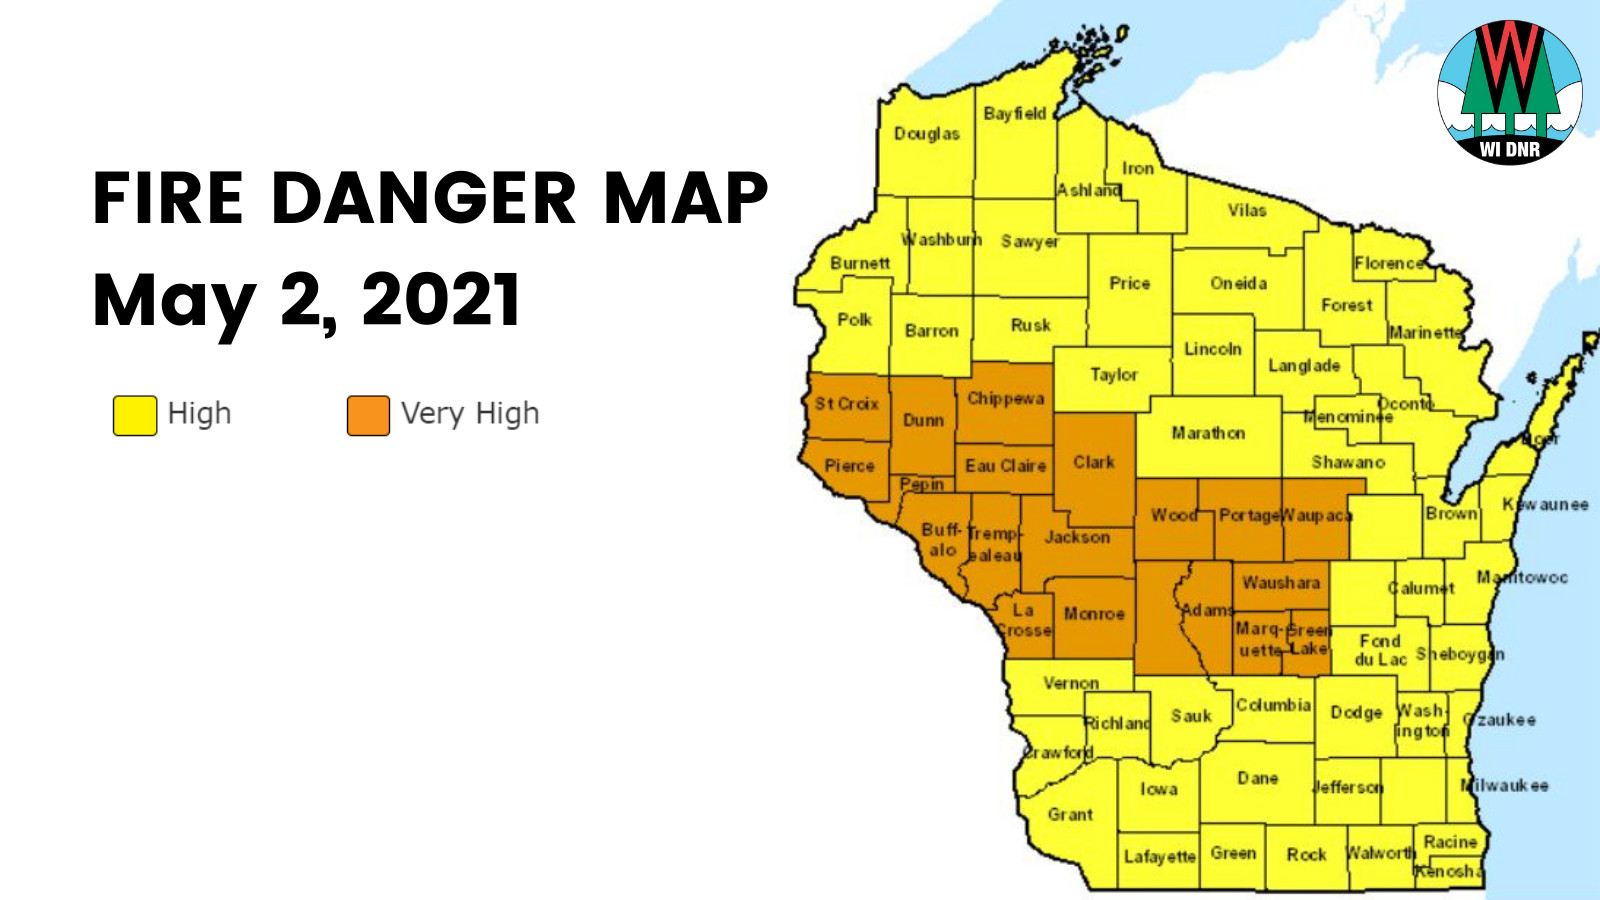 A map of HIGH and VERY high fire danger across Wisconsin for May 2, 2021.